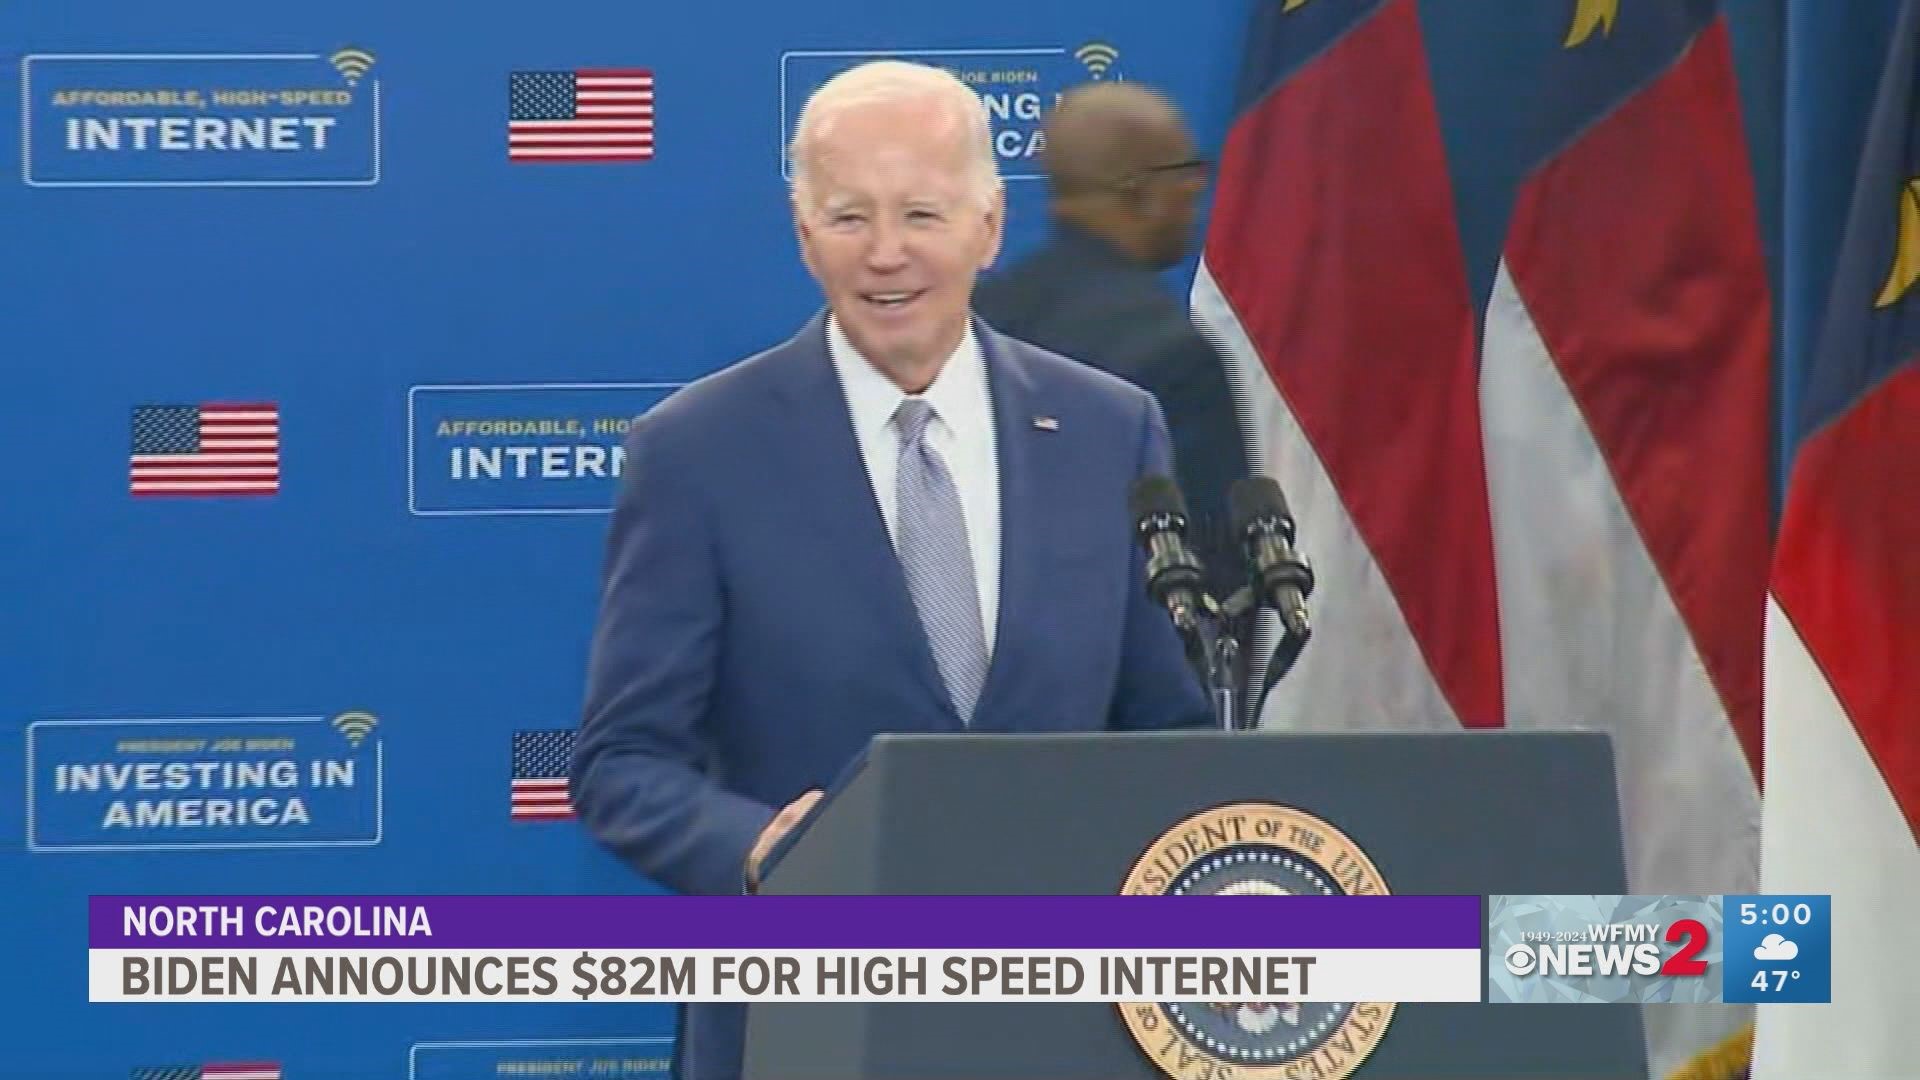 President Biden visited Raleigh with new investments in high-speed internet.